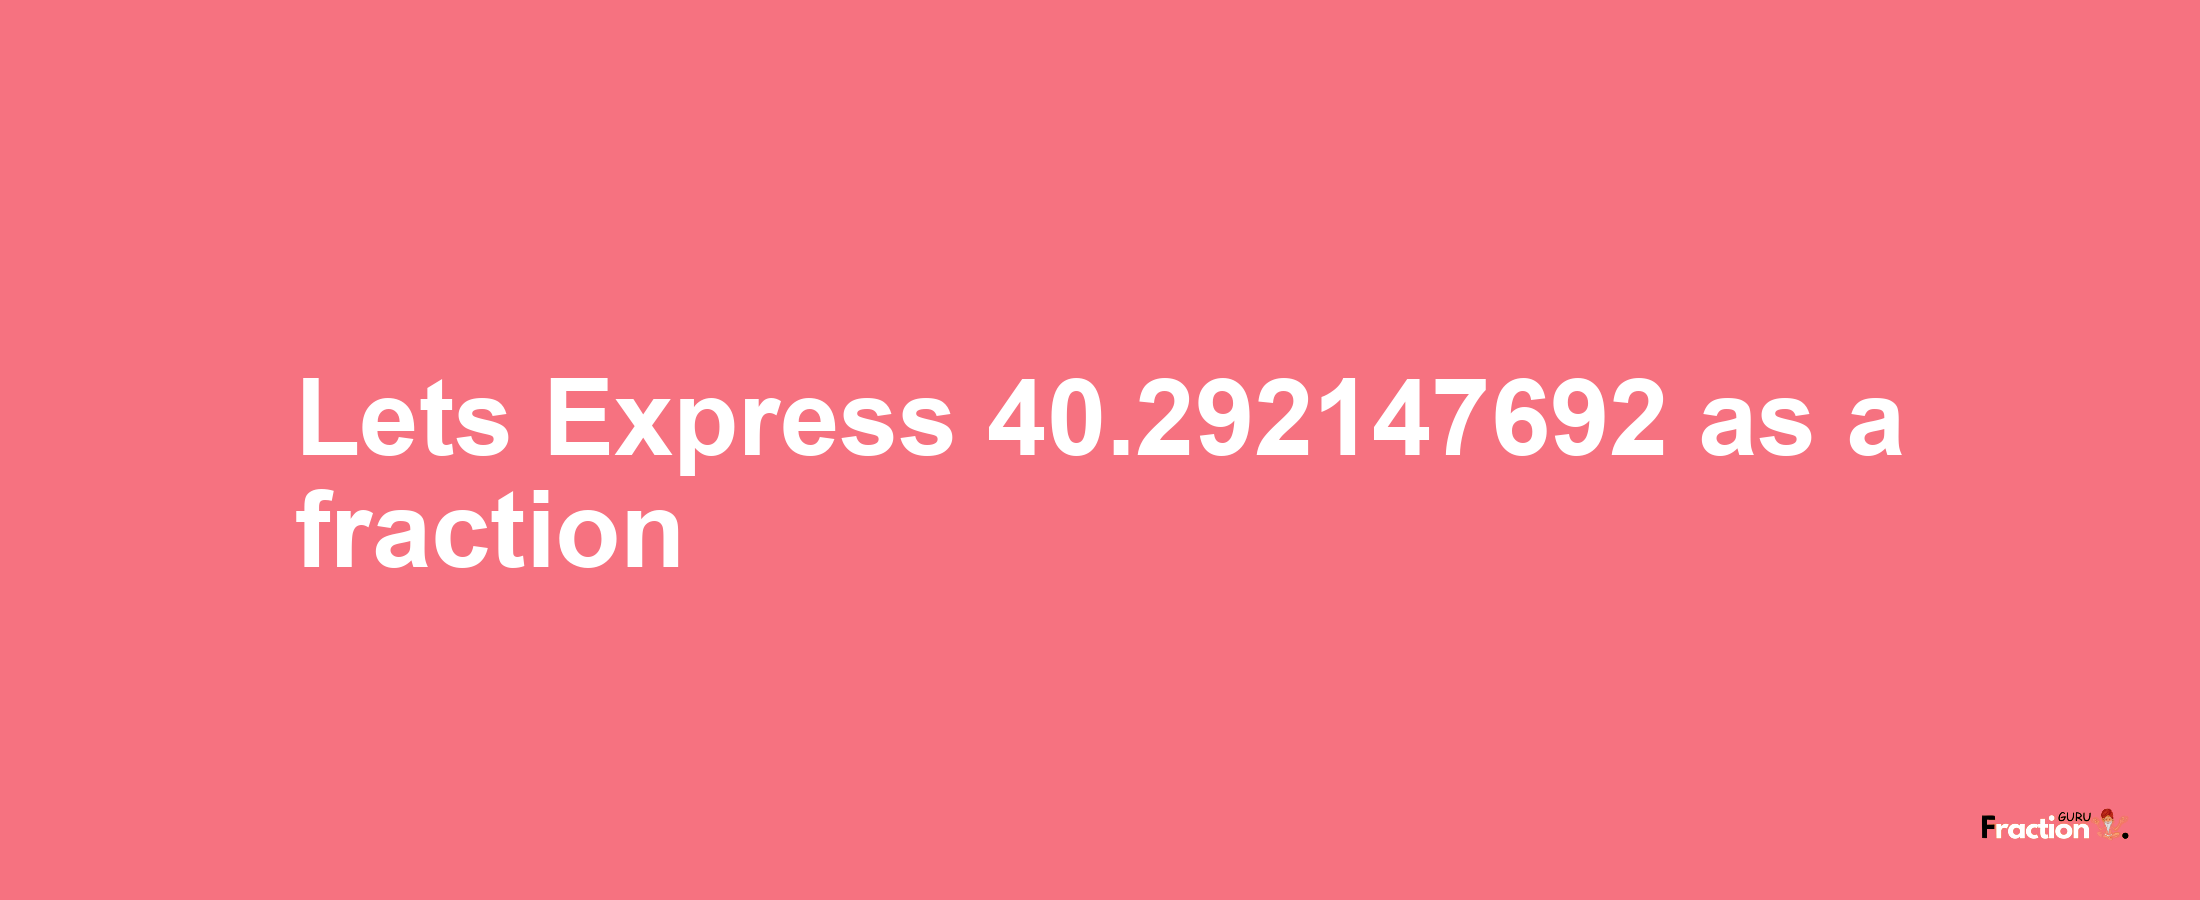 Lets Express 40.292147692 as afraction